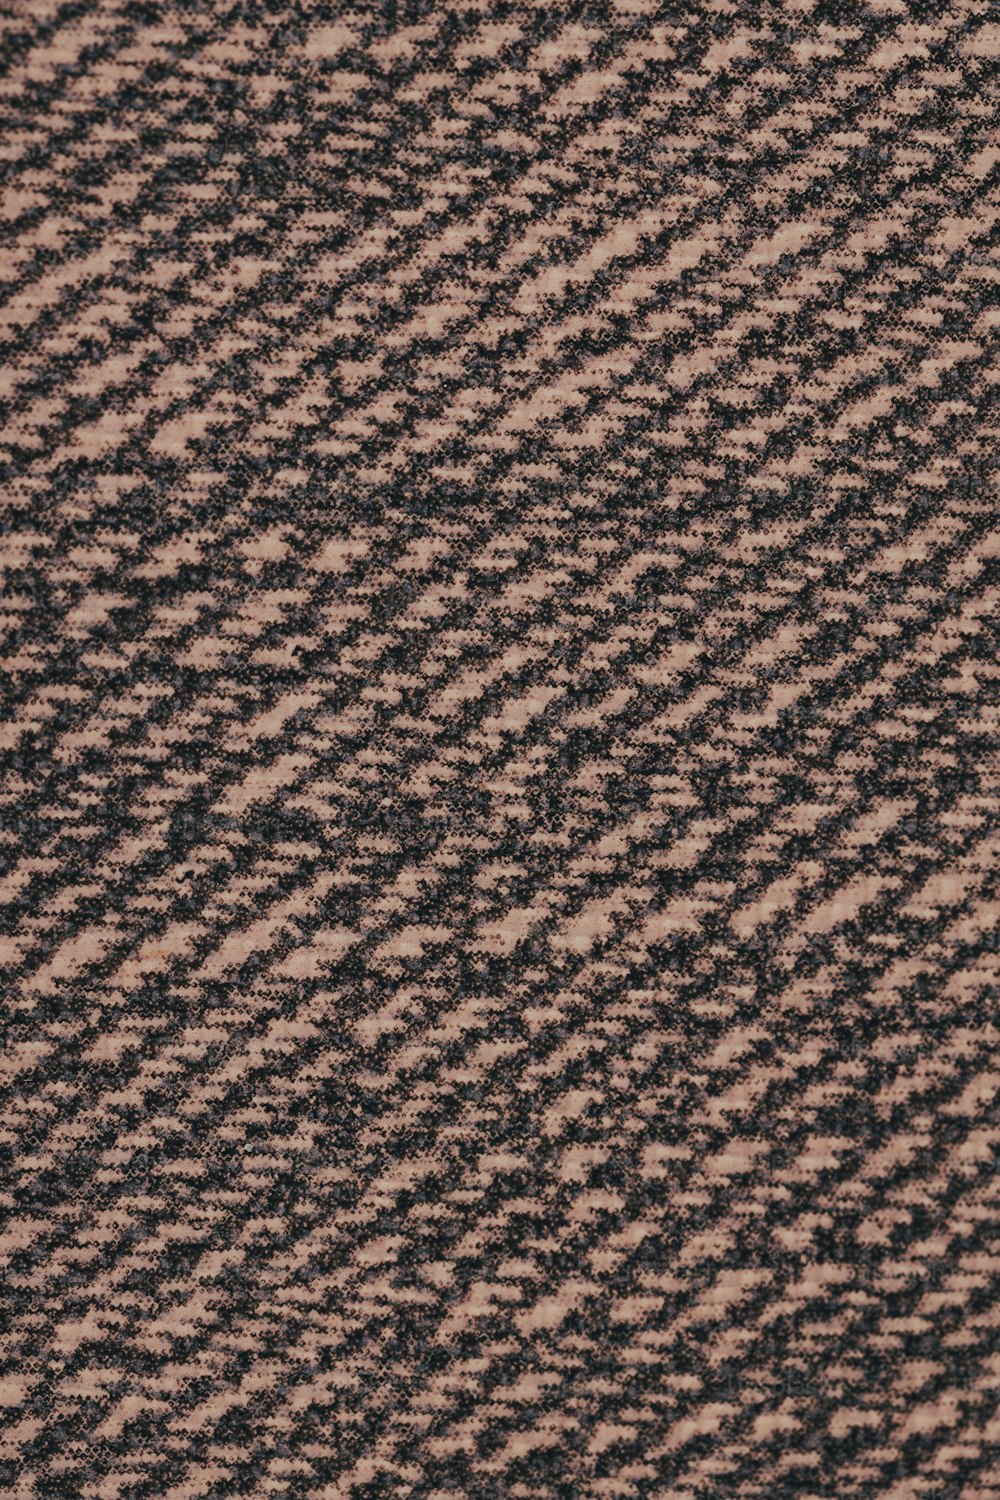 a close up of a brown and black tweed fabric